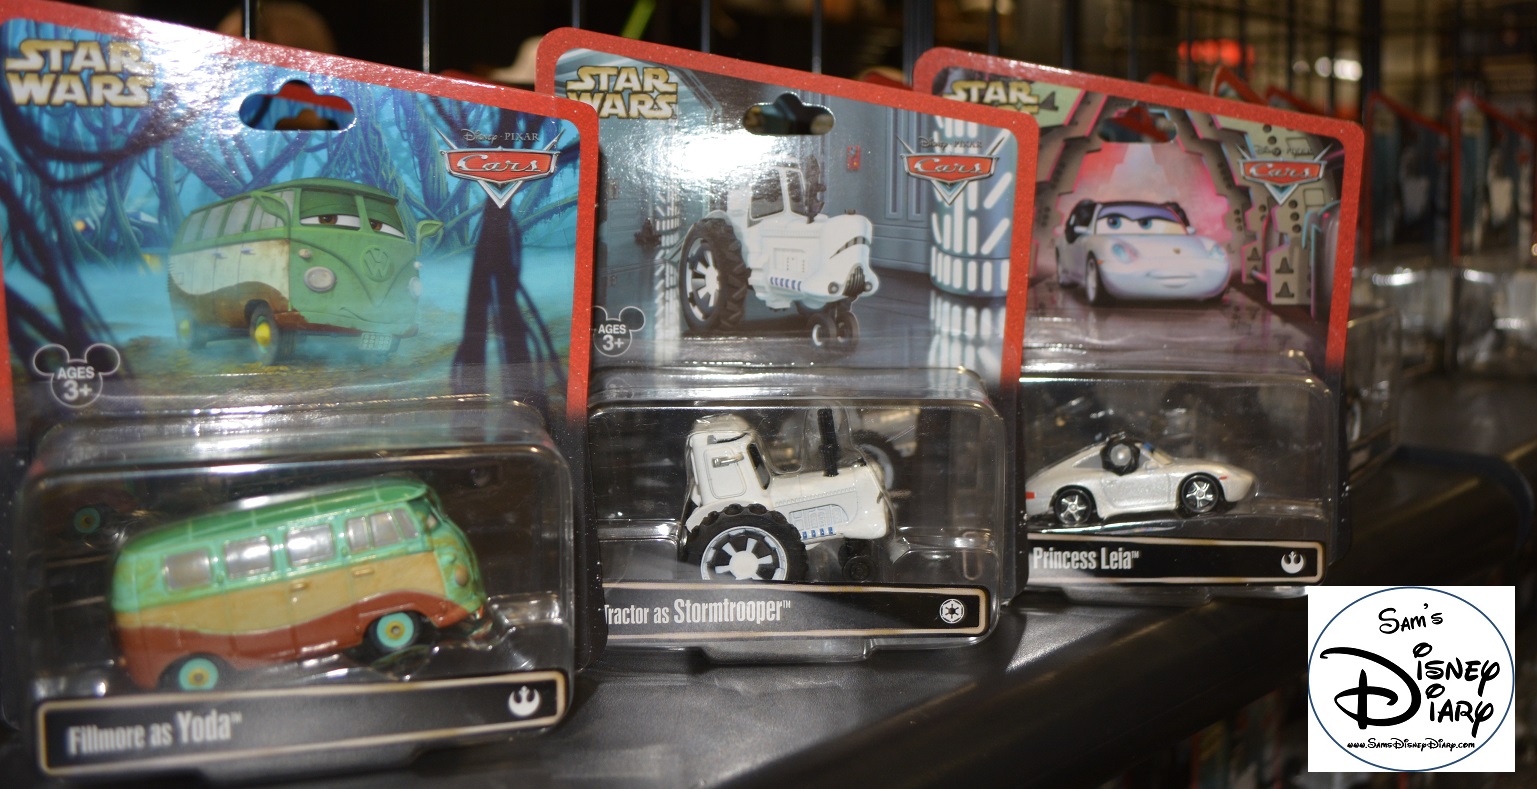 New for 2013... Star Wars / Cars! Combine classic Star Wars Characters with Disney/Pixar Cars.. and you get... Fillmore as Yoda, Matter as Darth Vader, and Lightning McQueen as Luke Skywalker.